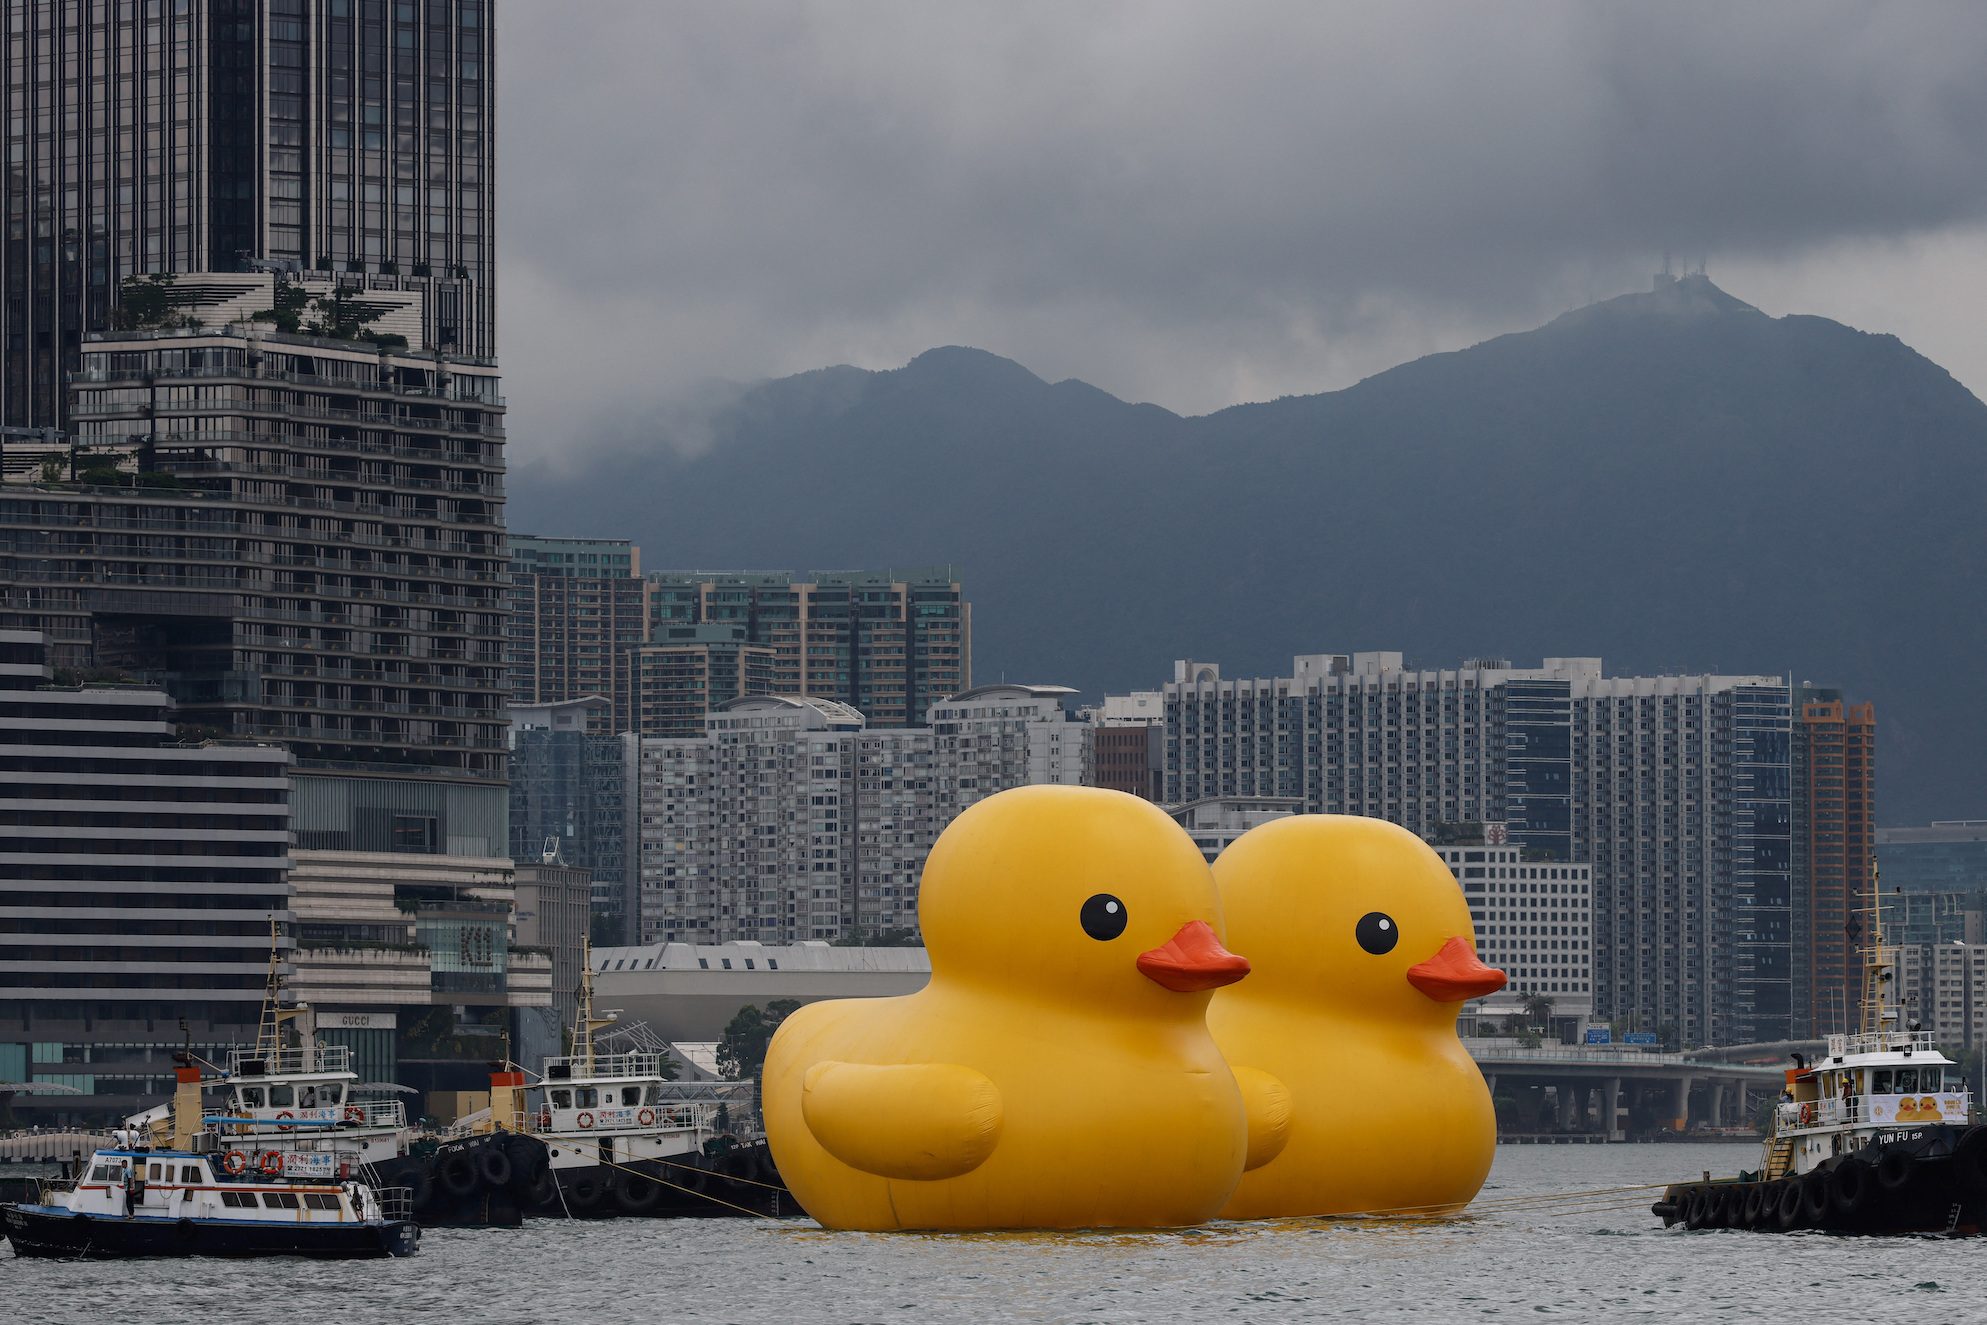 2 giant rubber ducks debut in Hong Kong in bid to drive ‘double happiness’